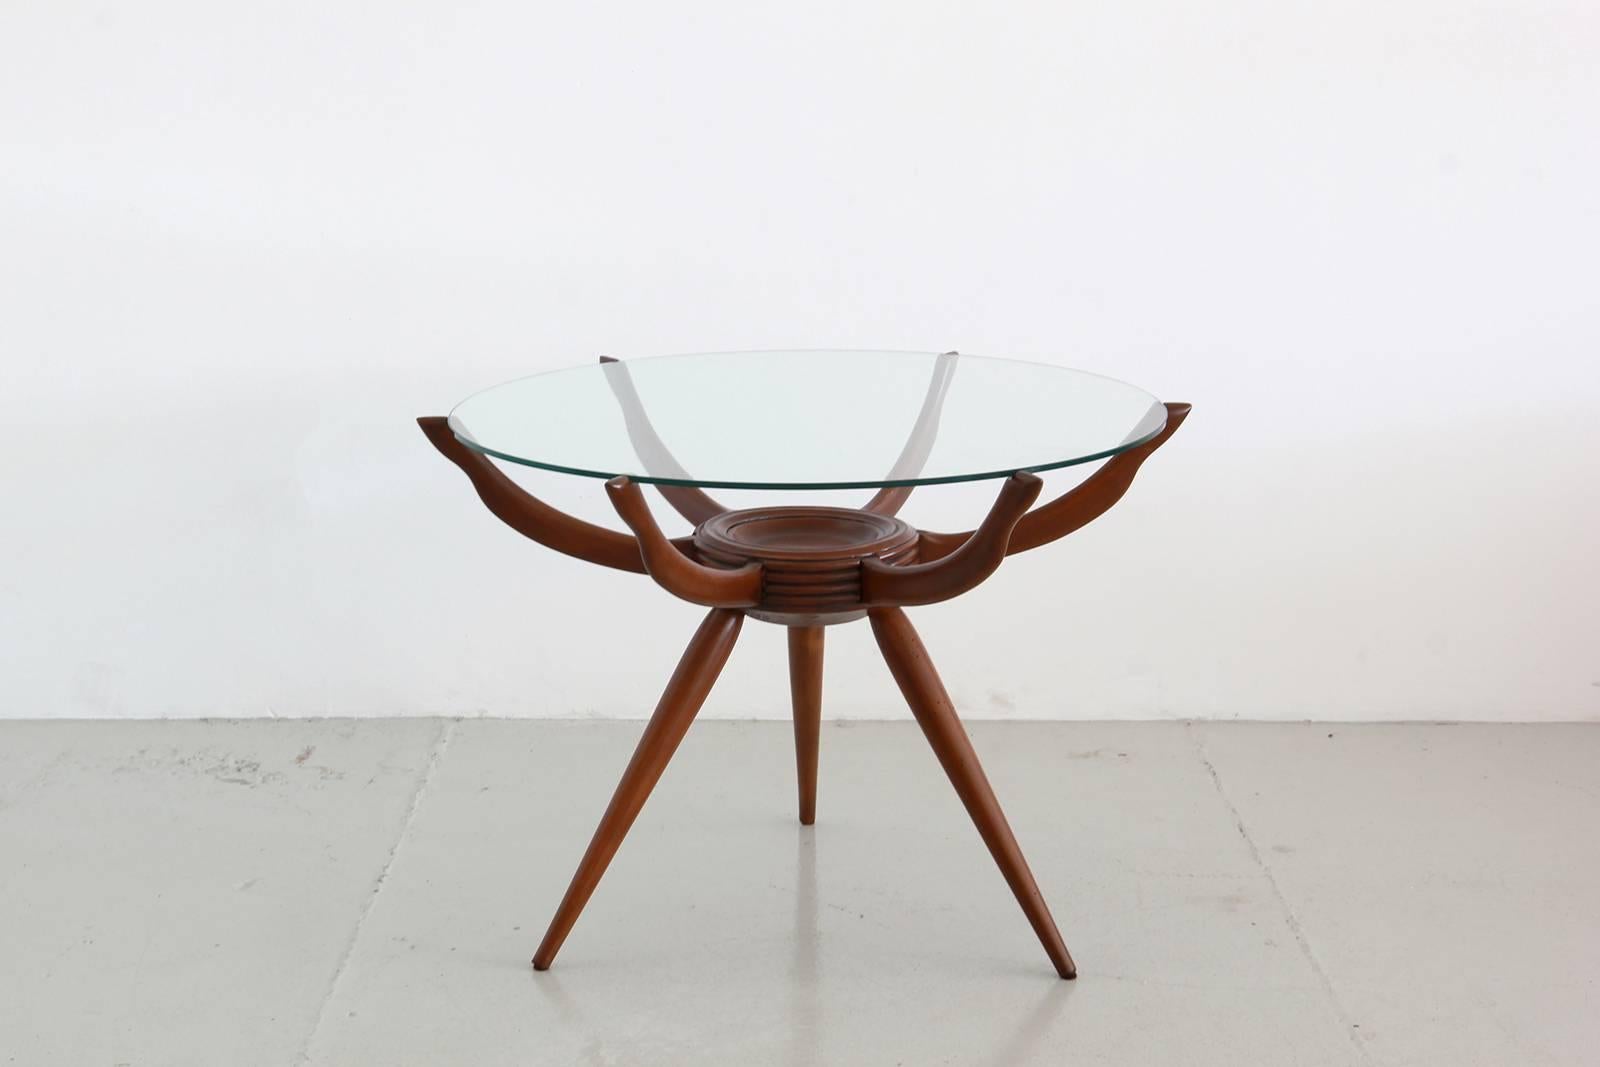 Wonderful Italian spider table by Carlo de Carli with floating glass, tripod legs, and six floating arms supporting original glass.

Refinished Mahogany.